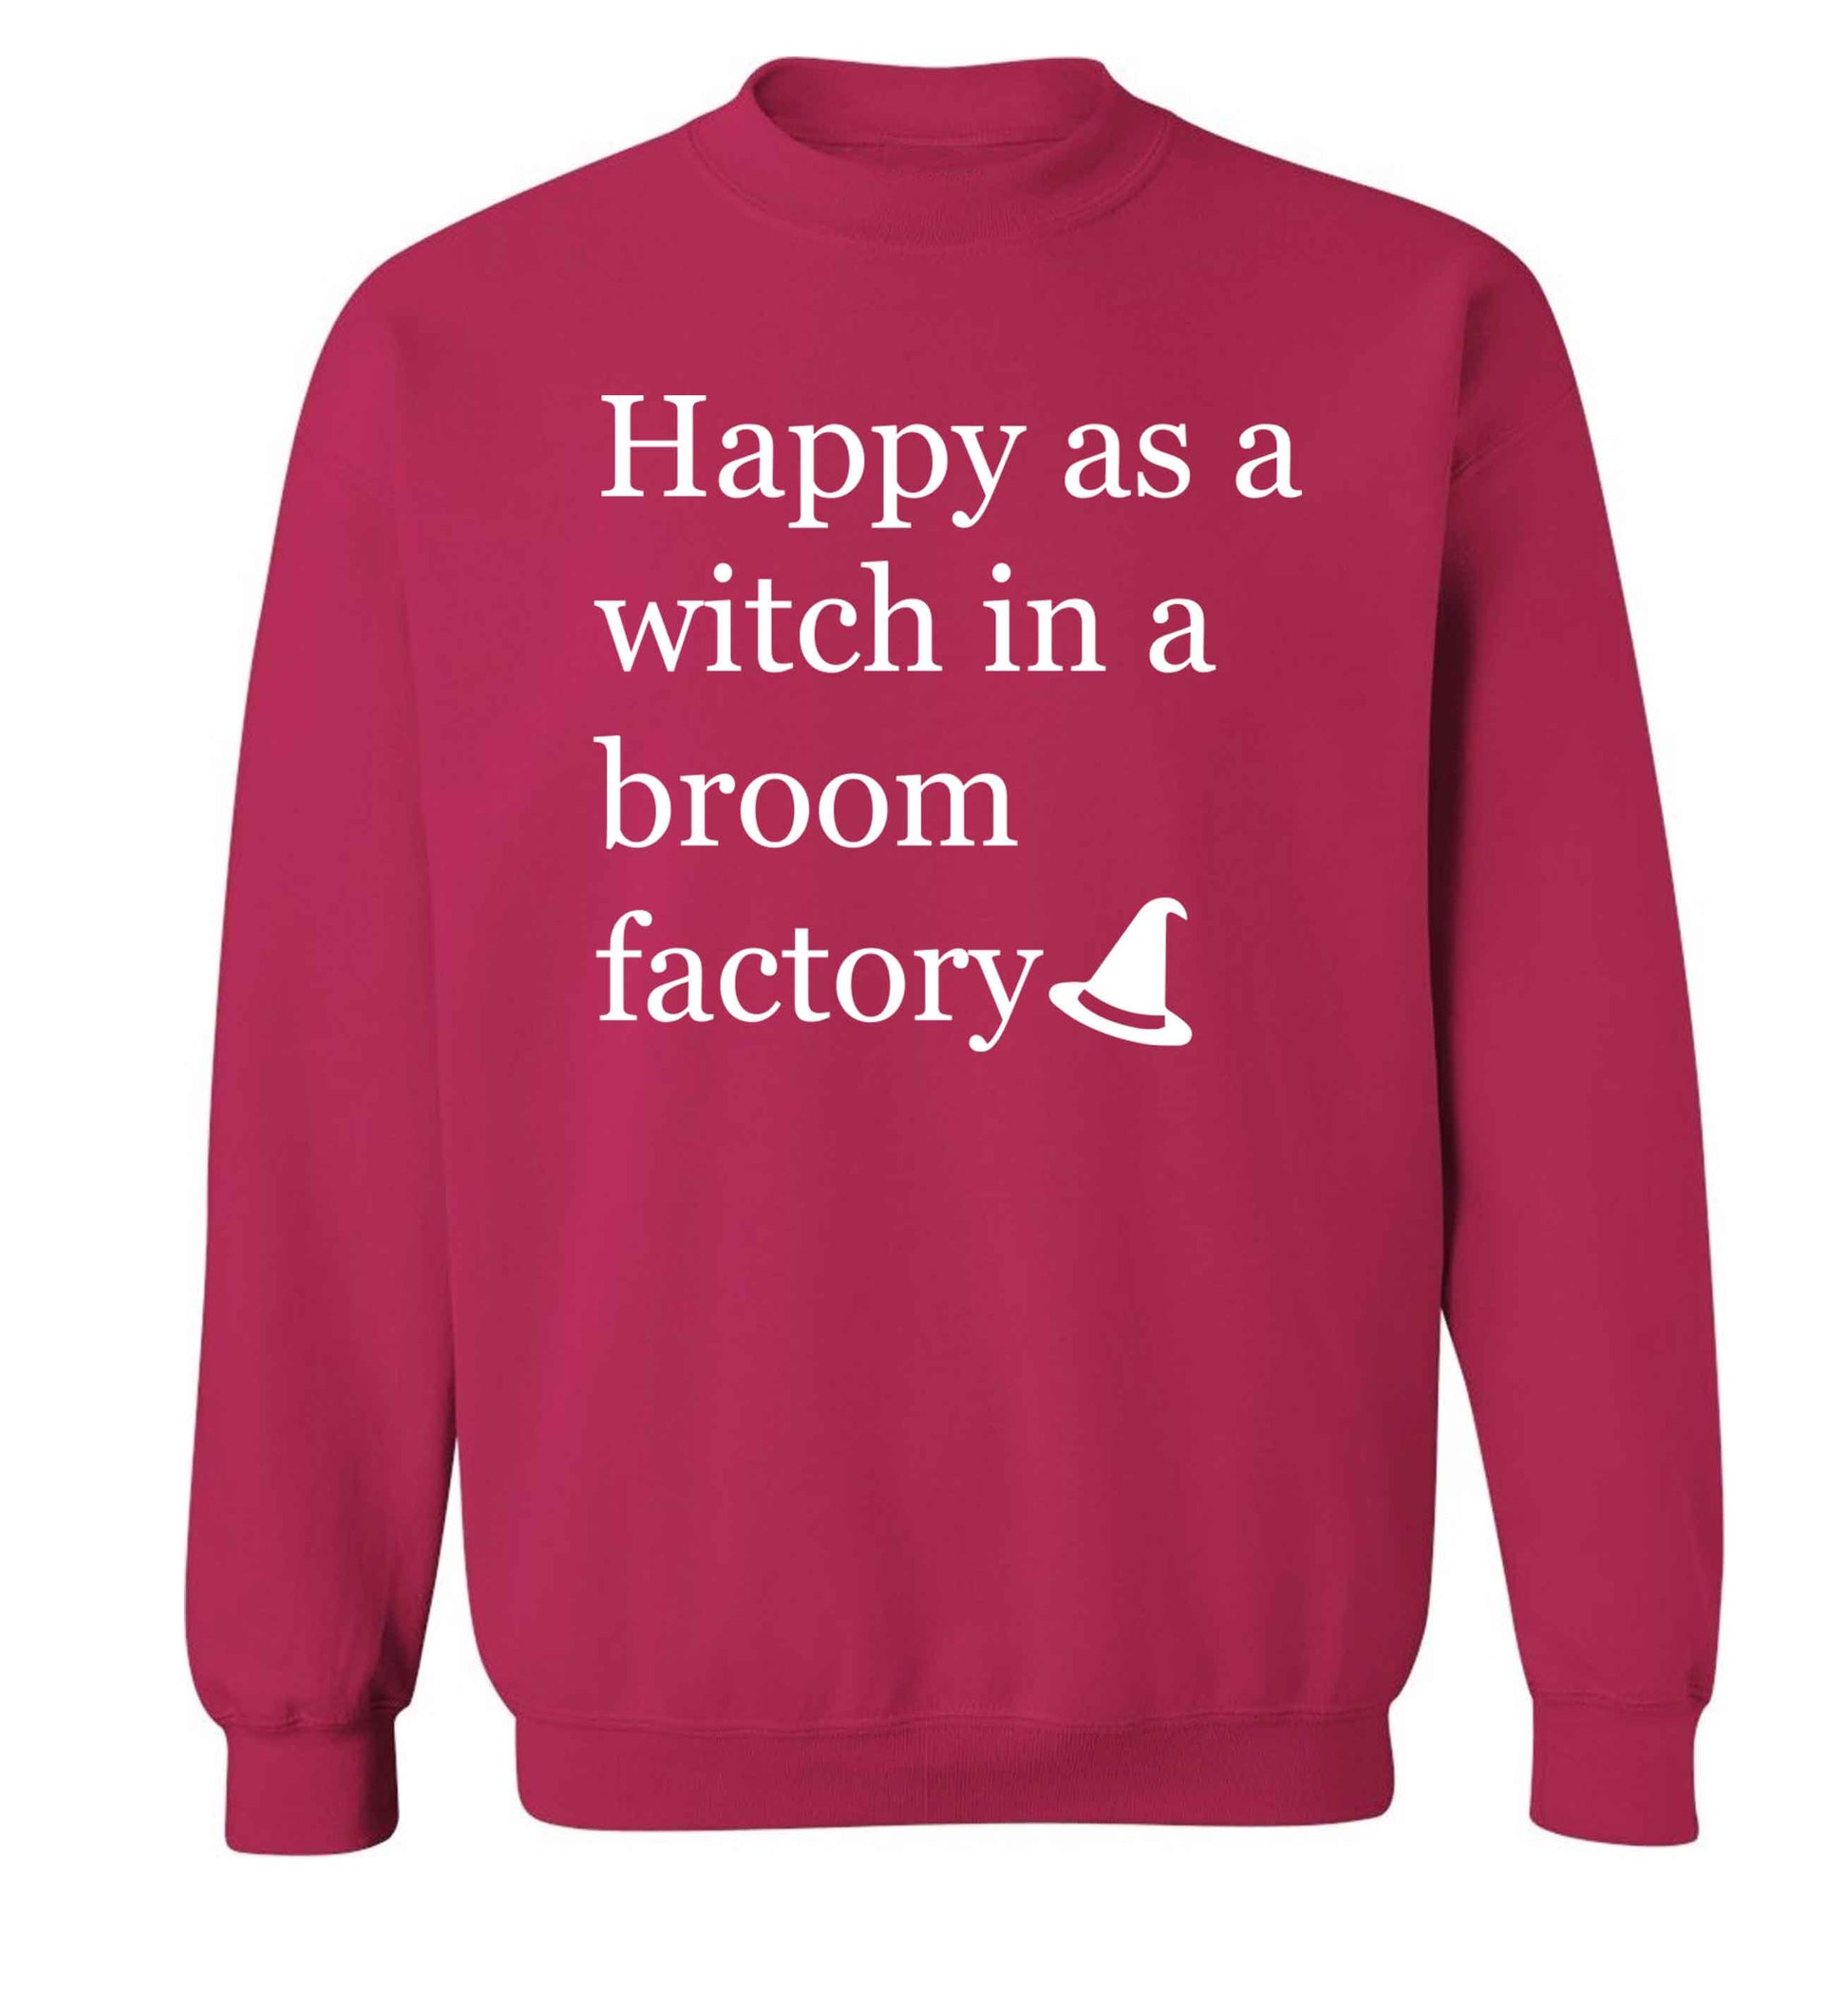 Happy as a witch in a broom factory Adult's unisex pink Sweater 2XL